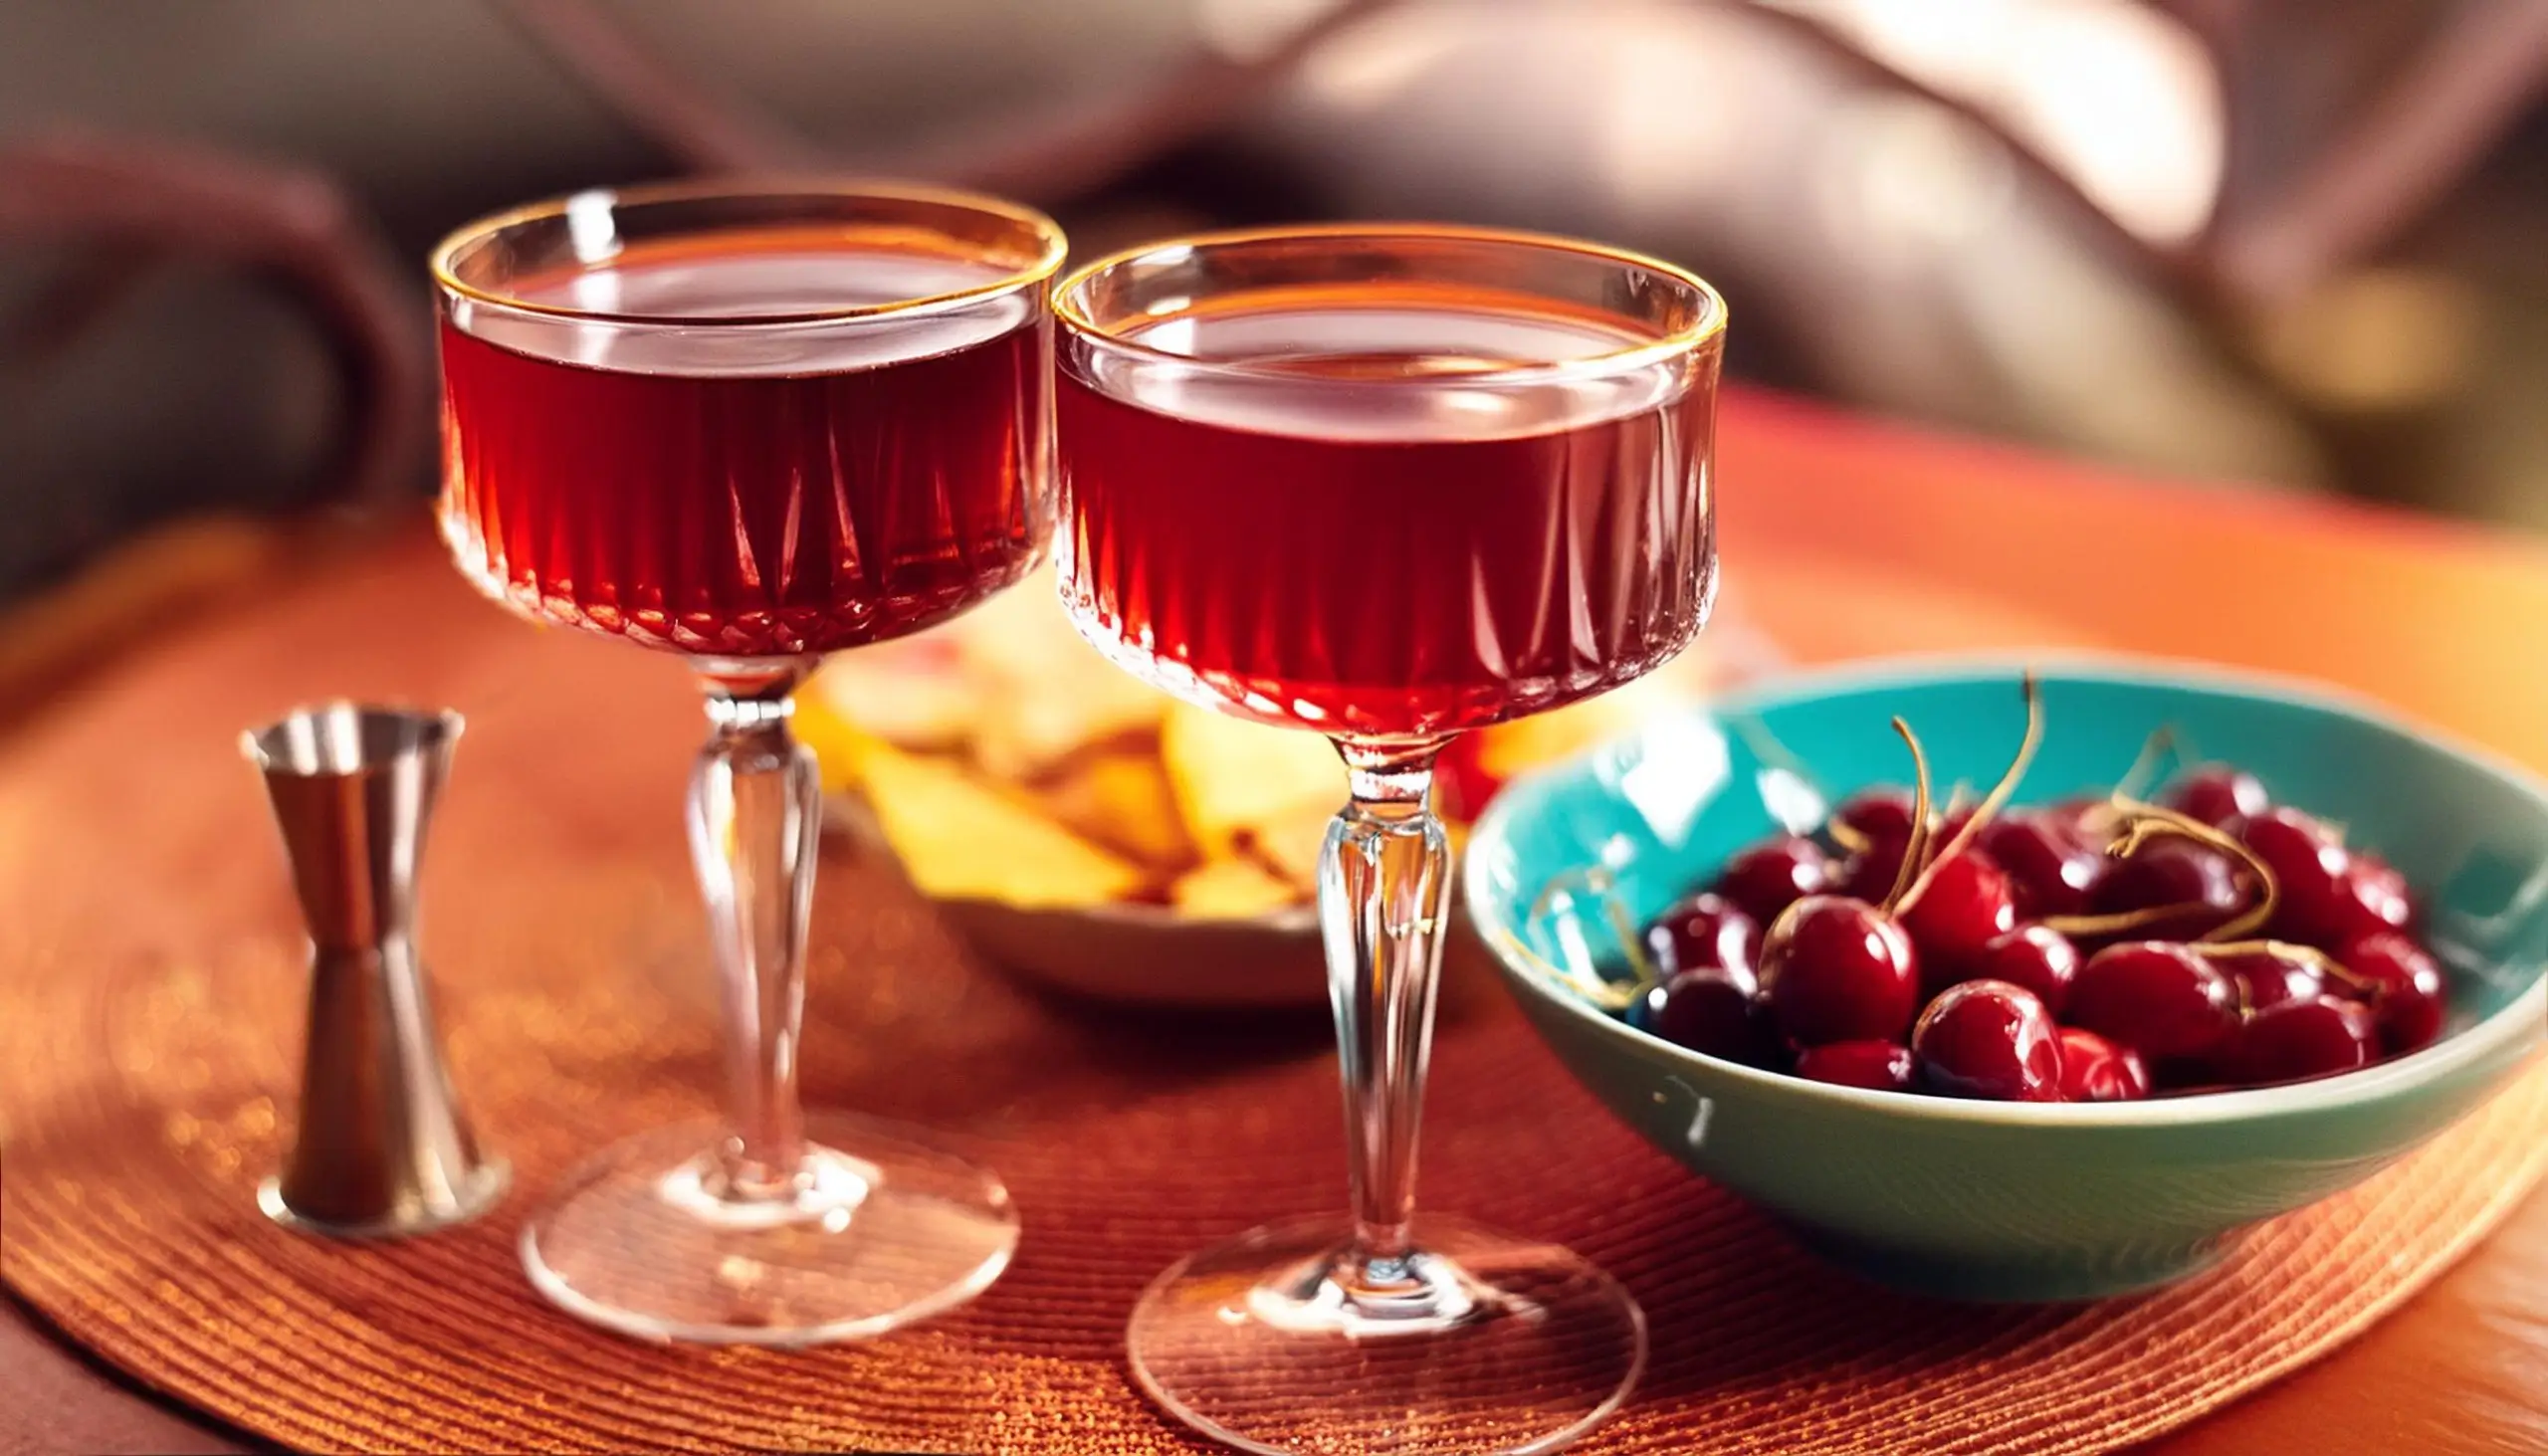 Two Añejo Tequila Manhattan cocktails with a bowl of Luxardo cherries next to it